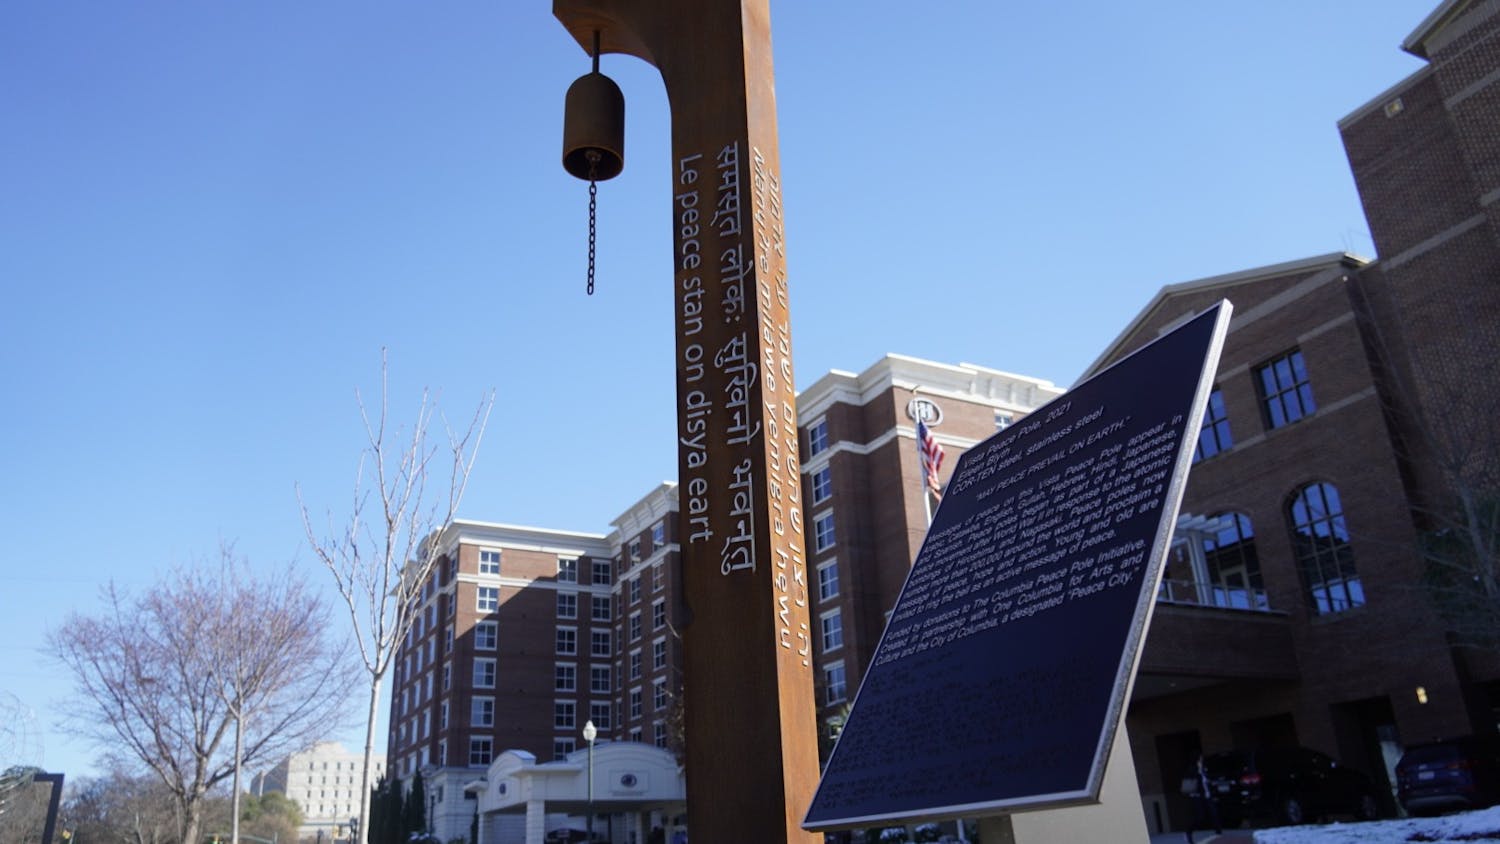 The Vista Peace Pole outside of the USC Alumni Center on Jan. 22, 2022. The new public art installation promotes a message of peace in eight different languages in Columbia’s Vista district.